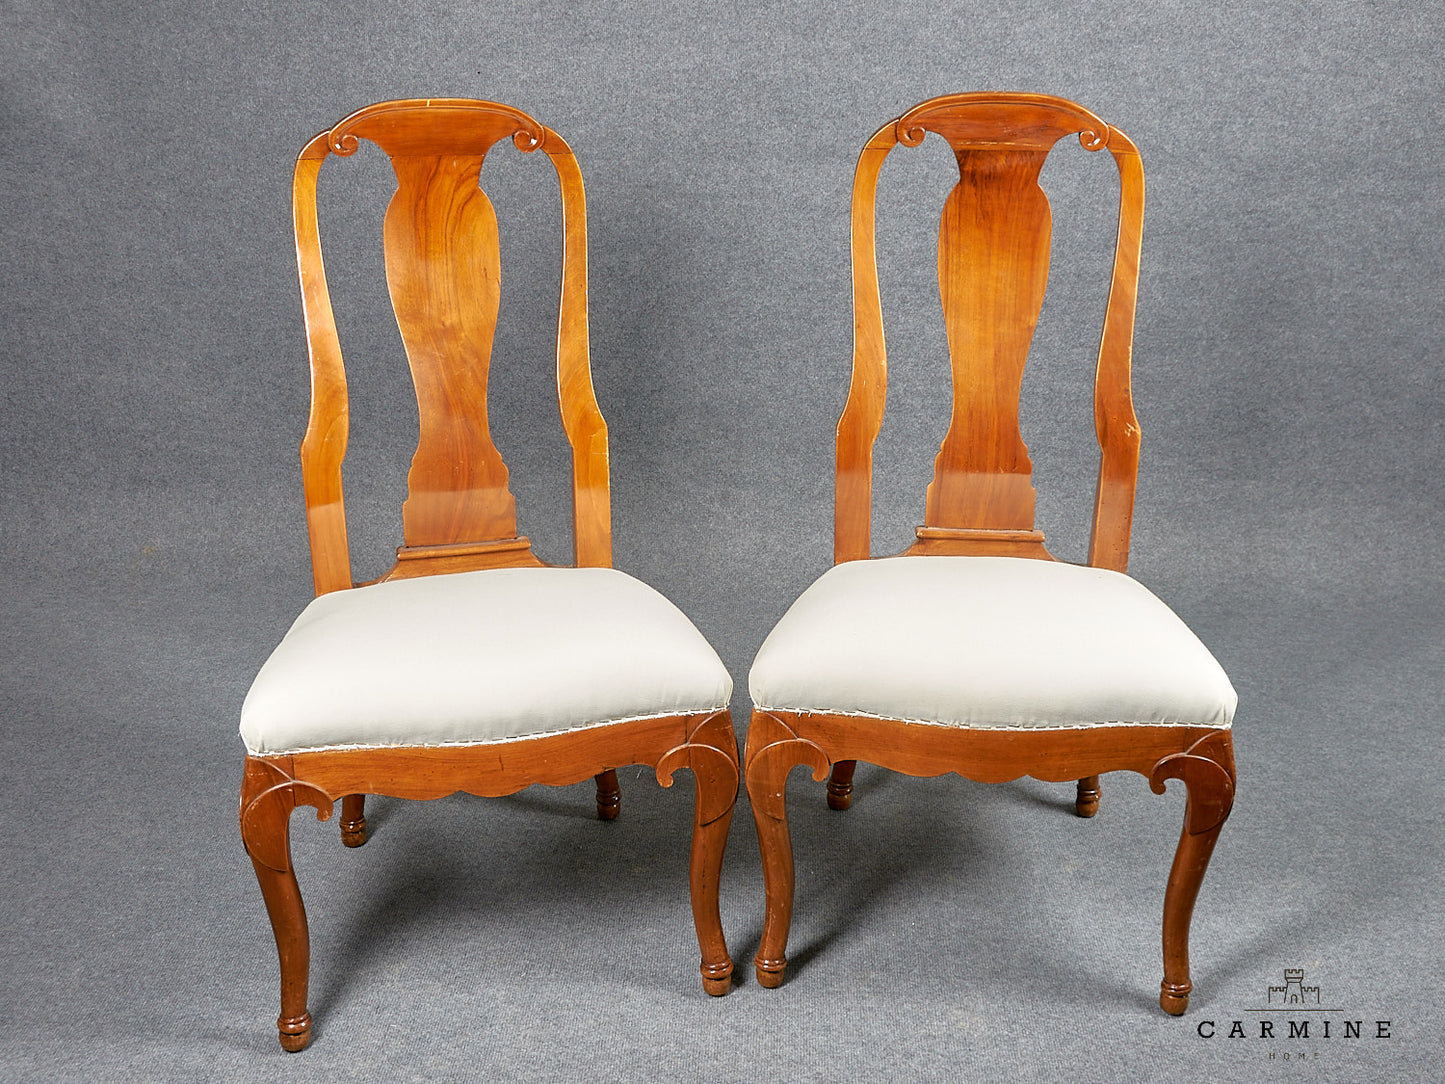 1 pair of Bernese tongue chairs, 18th century